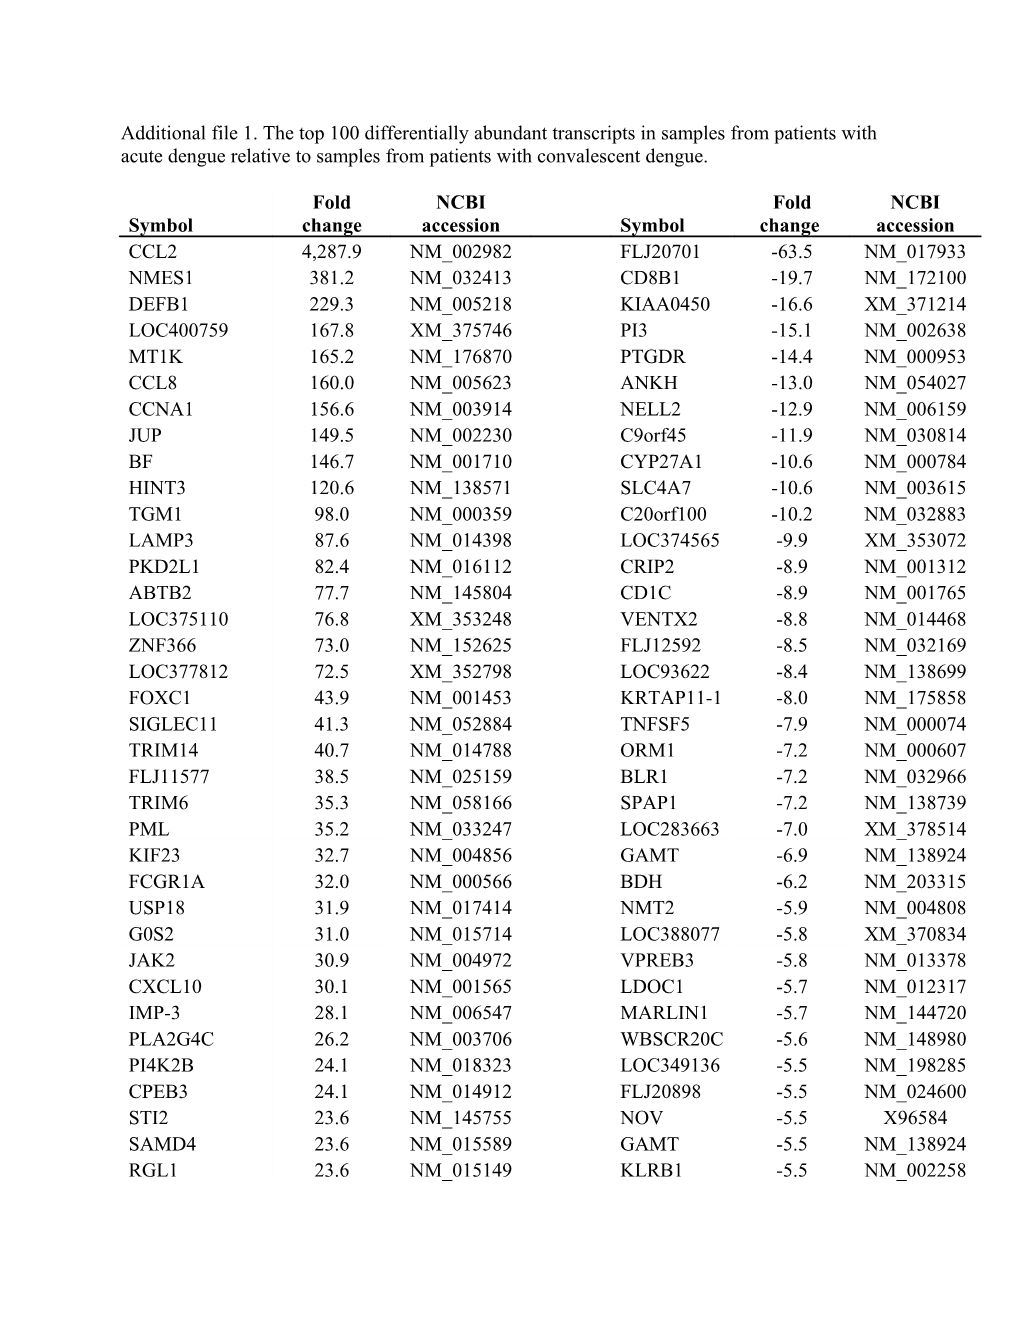 Additional File 1. the Top 100 Differentially Abundant Transcripts in Samples from Patients